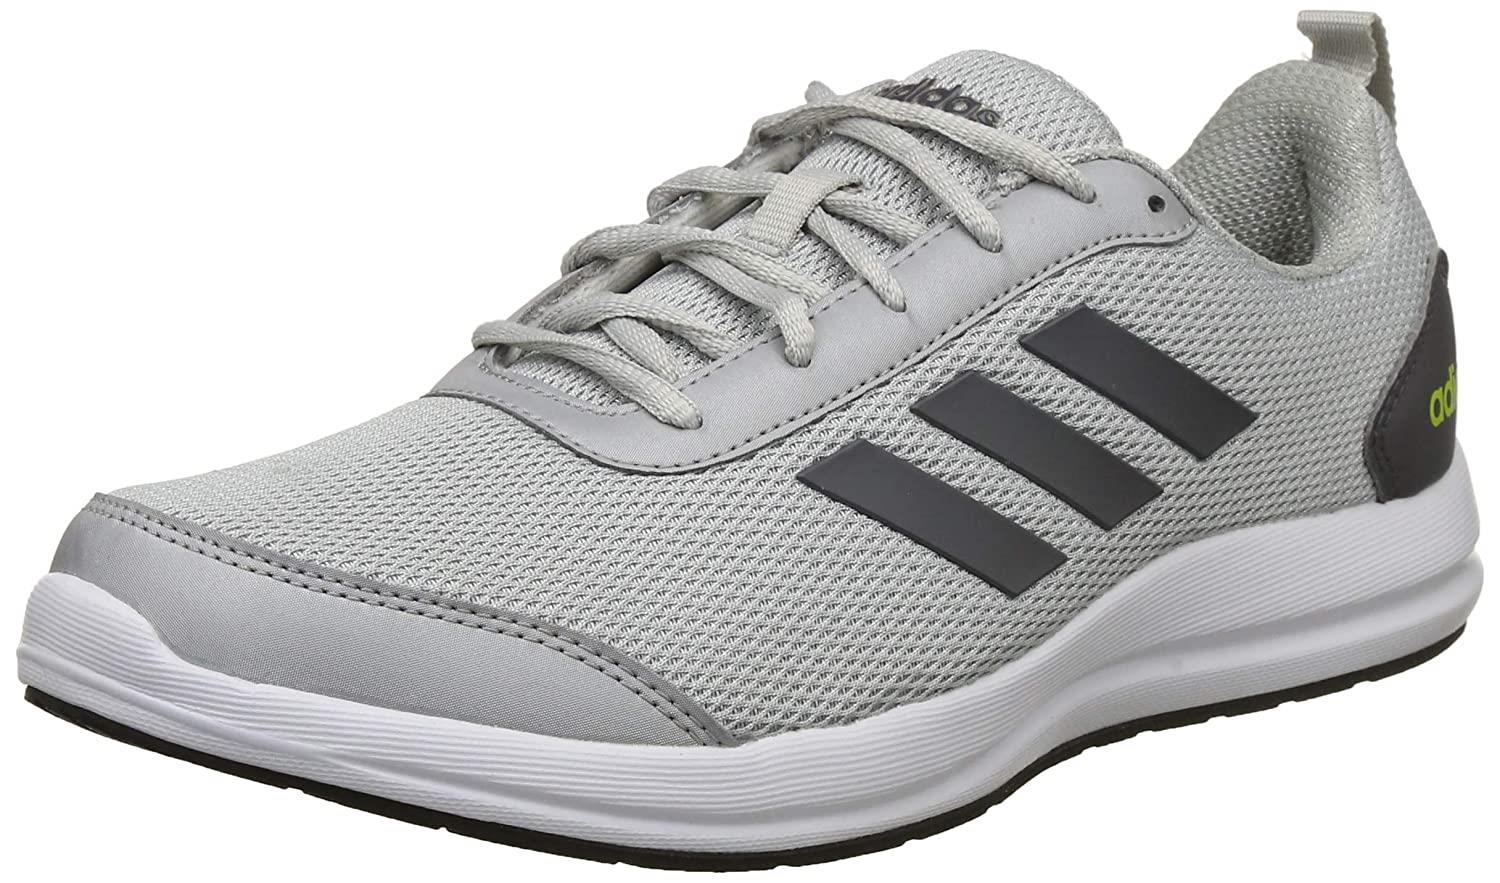 adidas glide shoes